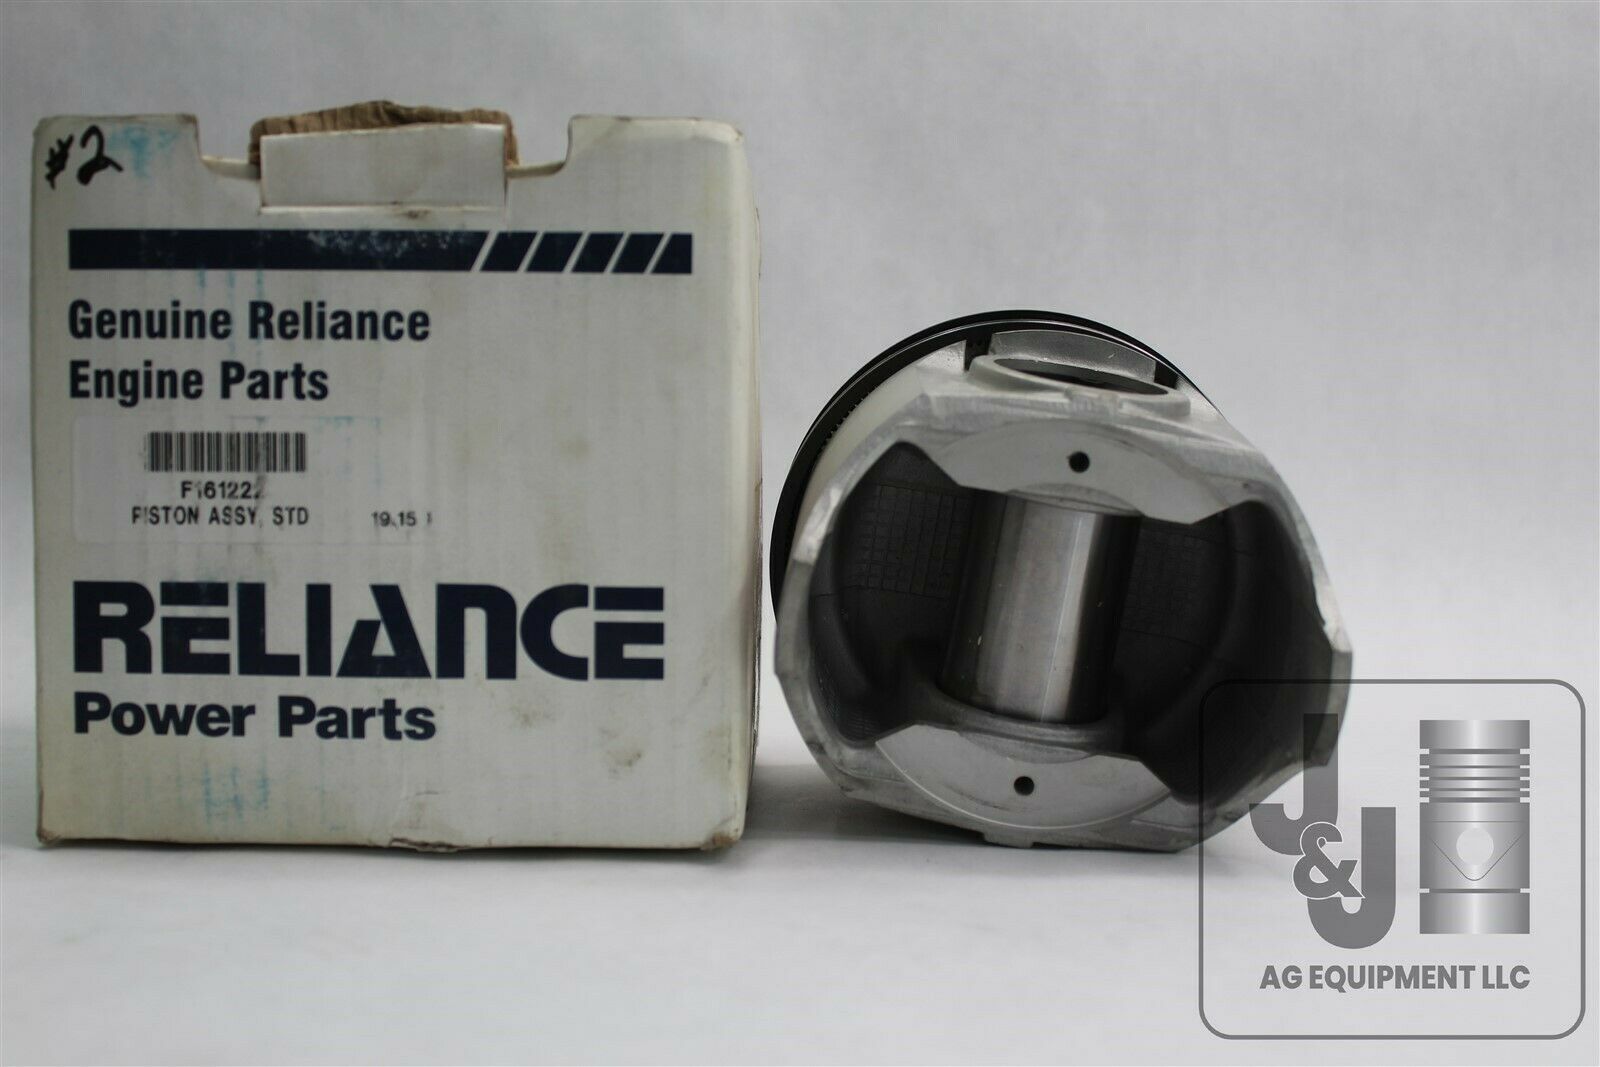 RELIANCE F161222 PISTON ASSY STD 4.401" BORE Fits Ford Tractors